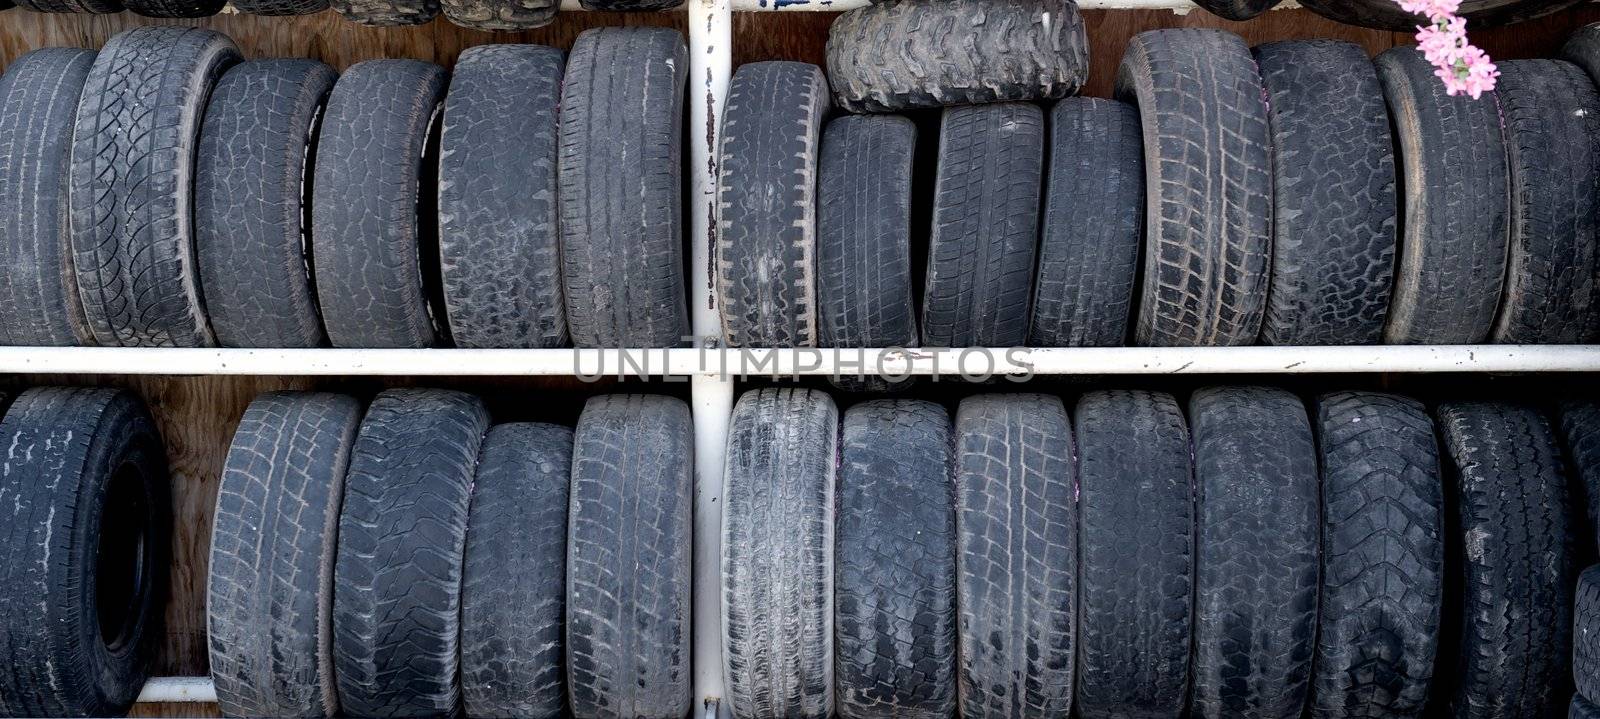 Rack of Worn Automobile Tires by pixelsnap